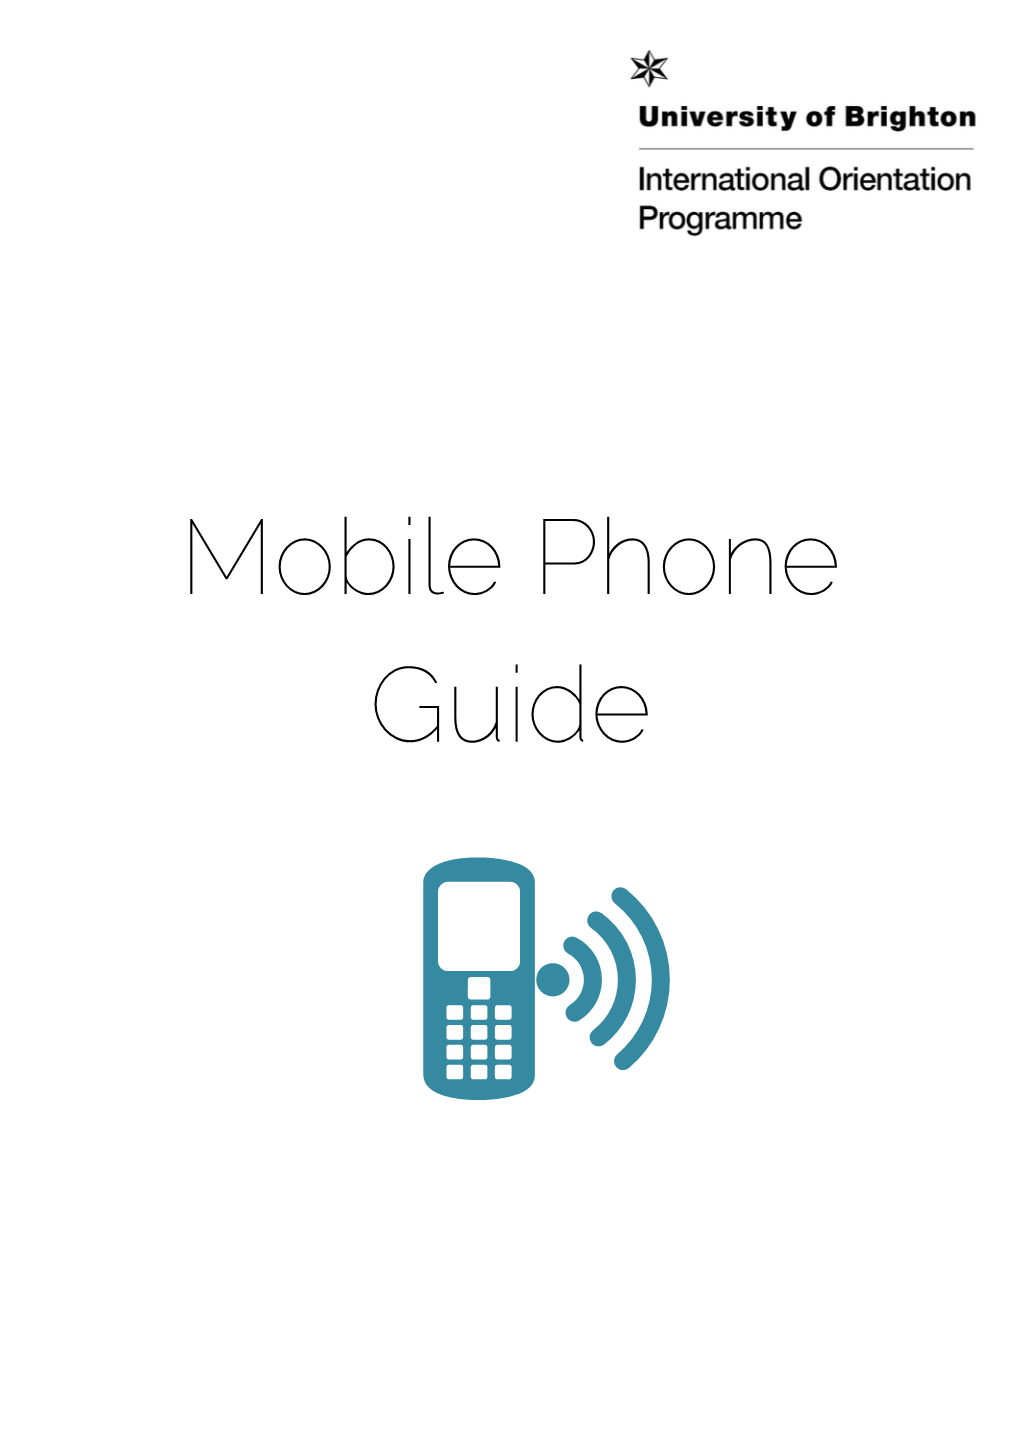 Your Guide to Mobile Phone Use in the UK